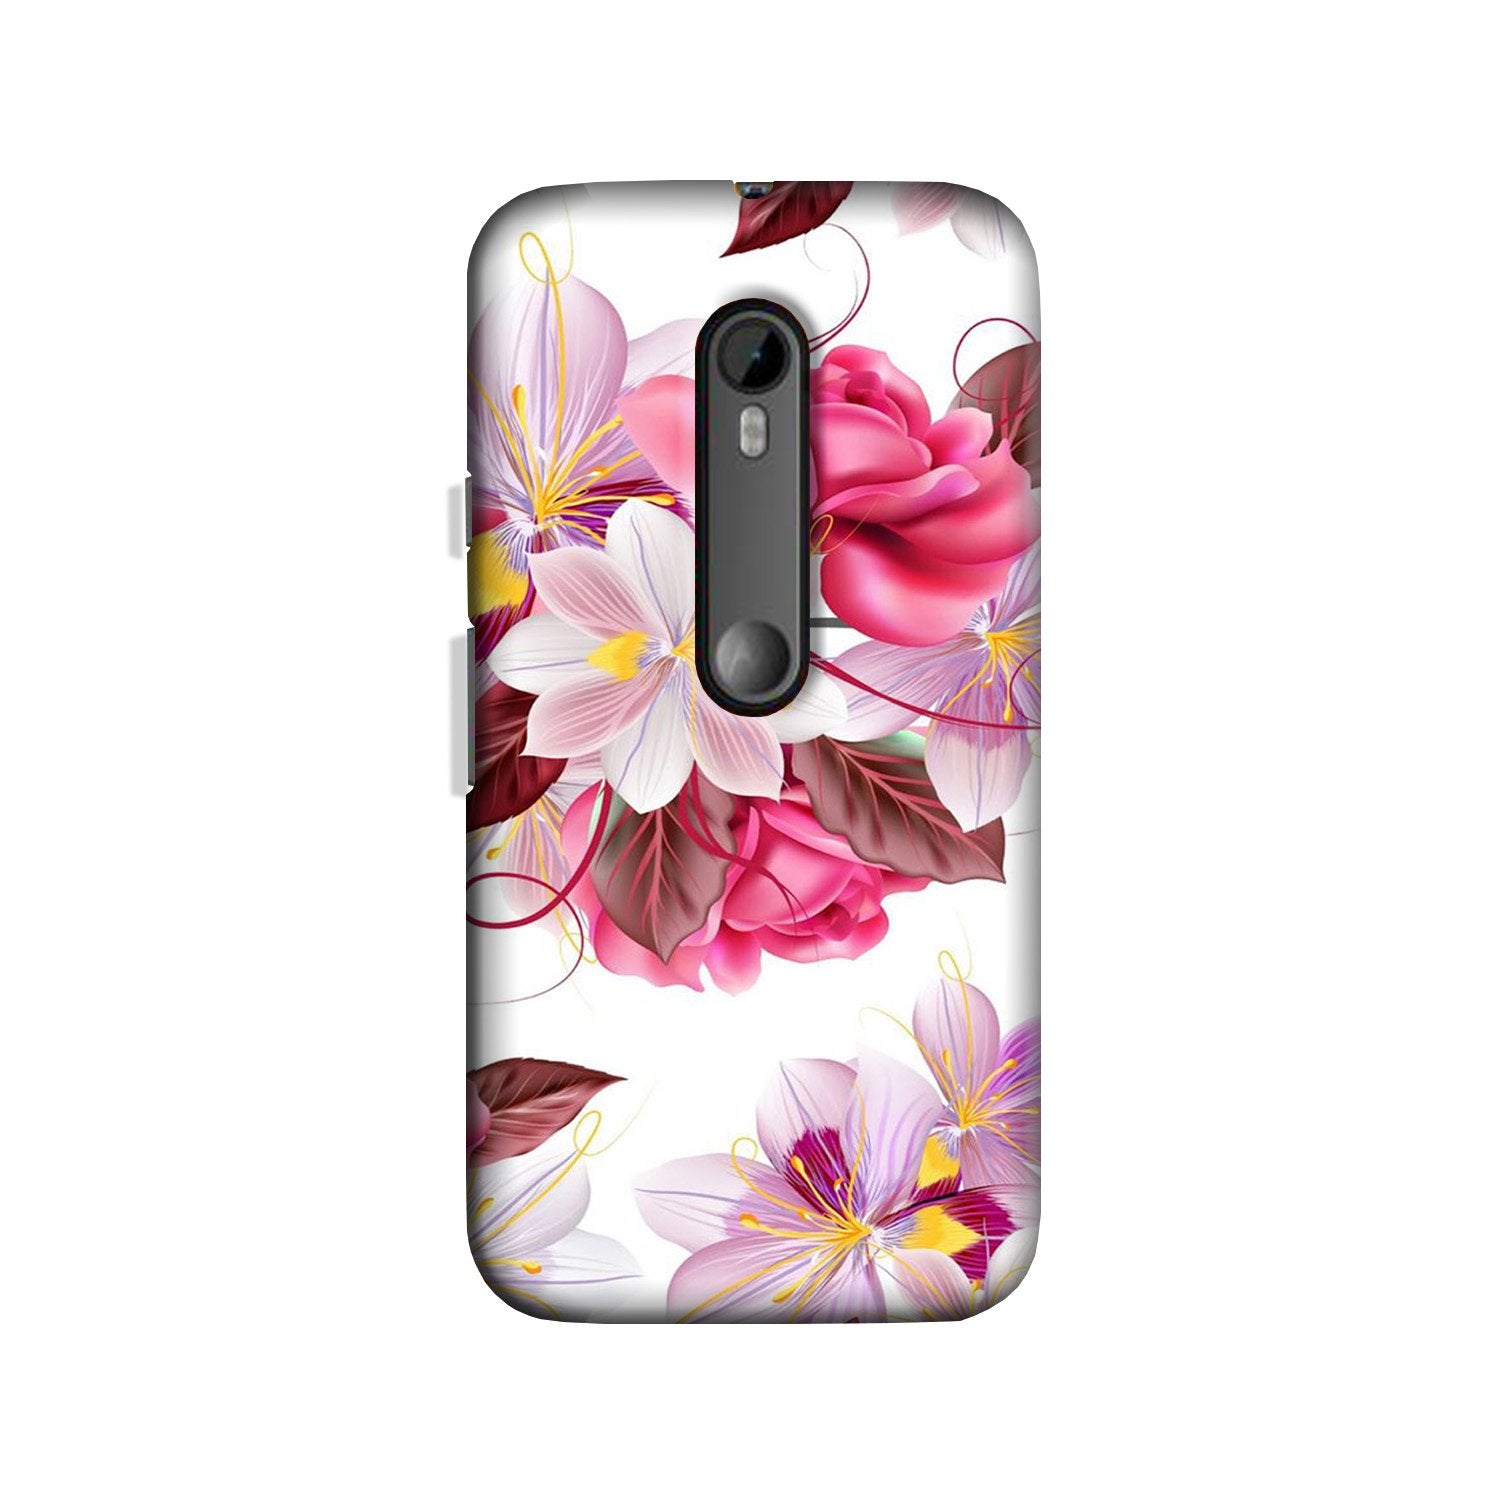 Beautiful flowers Case for Moto X Force